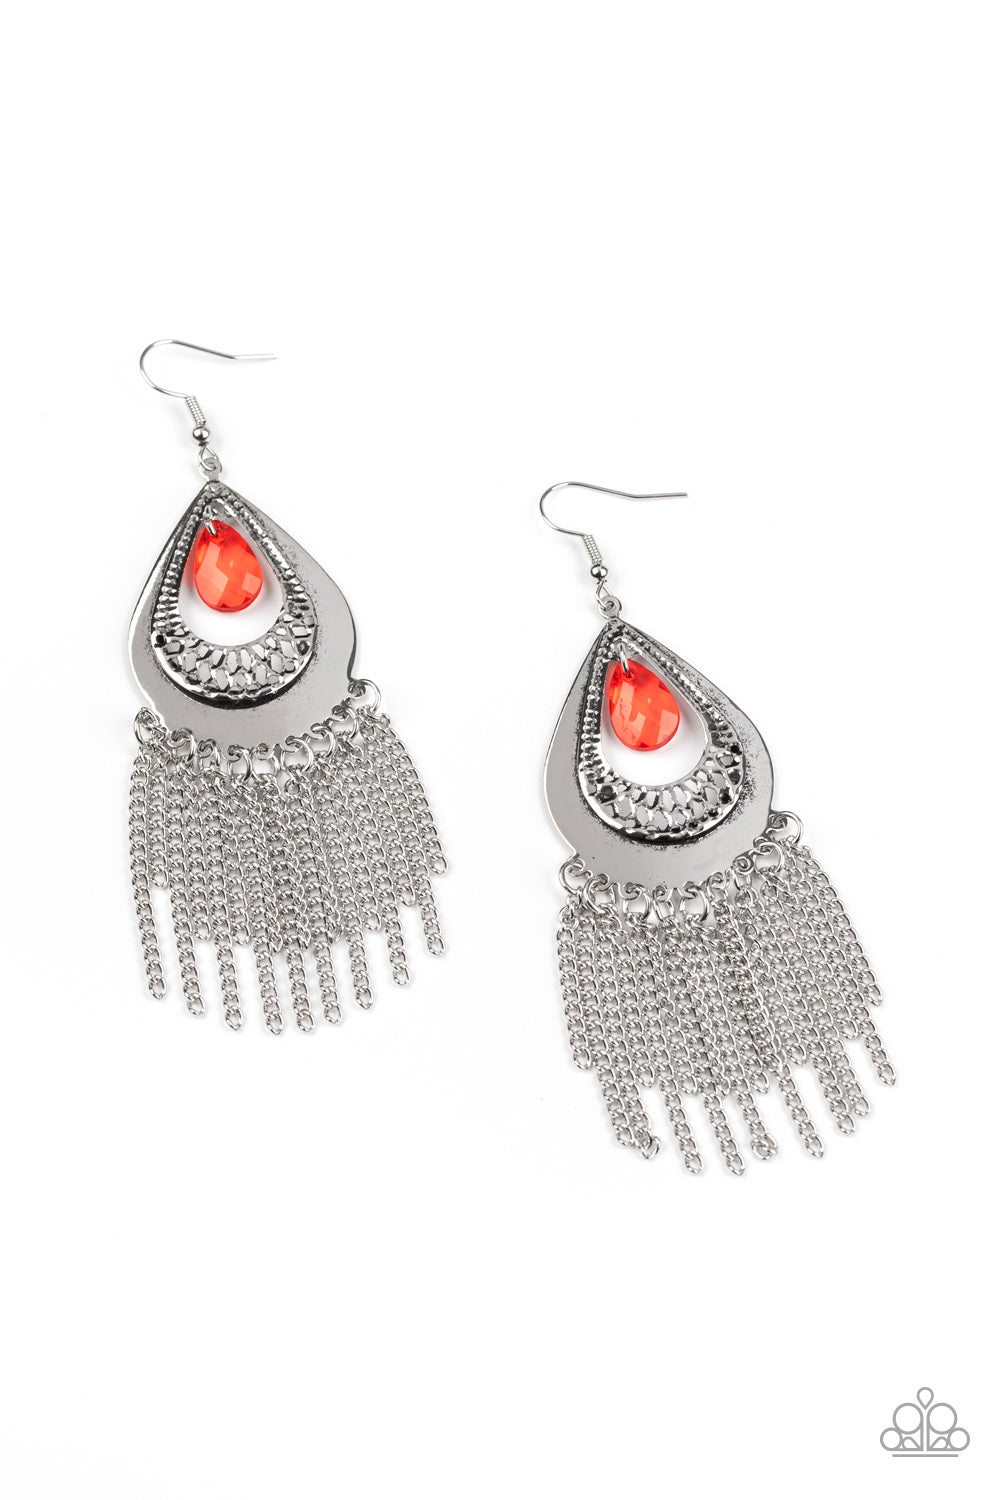 A faceted red teardrop dangles from the top of a decorative silver teardrop frame featuring stenciled and hammered details. Dainty silver chains stream from the bottom, adding a classic fringe to the refined display. Earring attaches to a standard fishhook fitting.